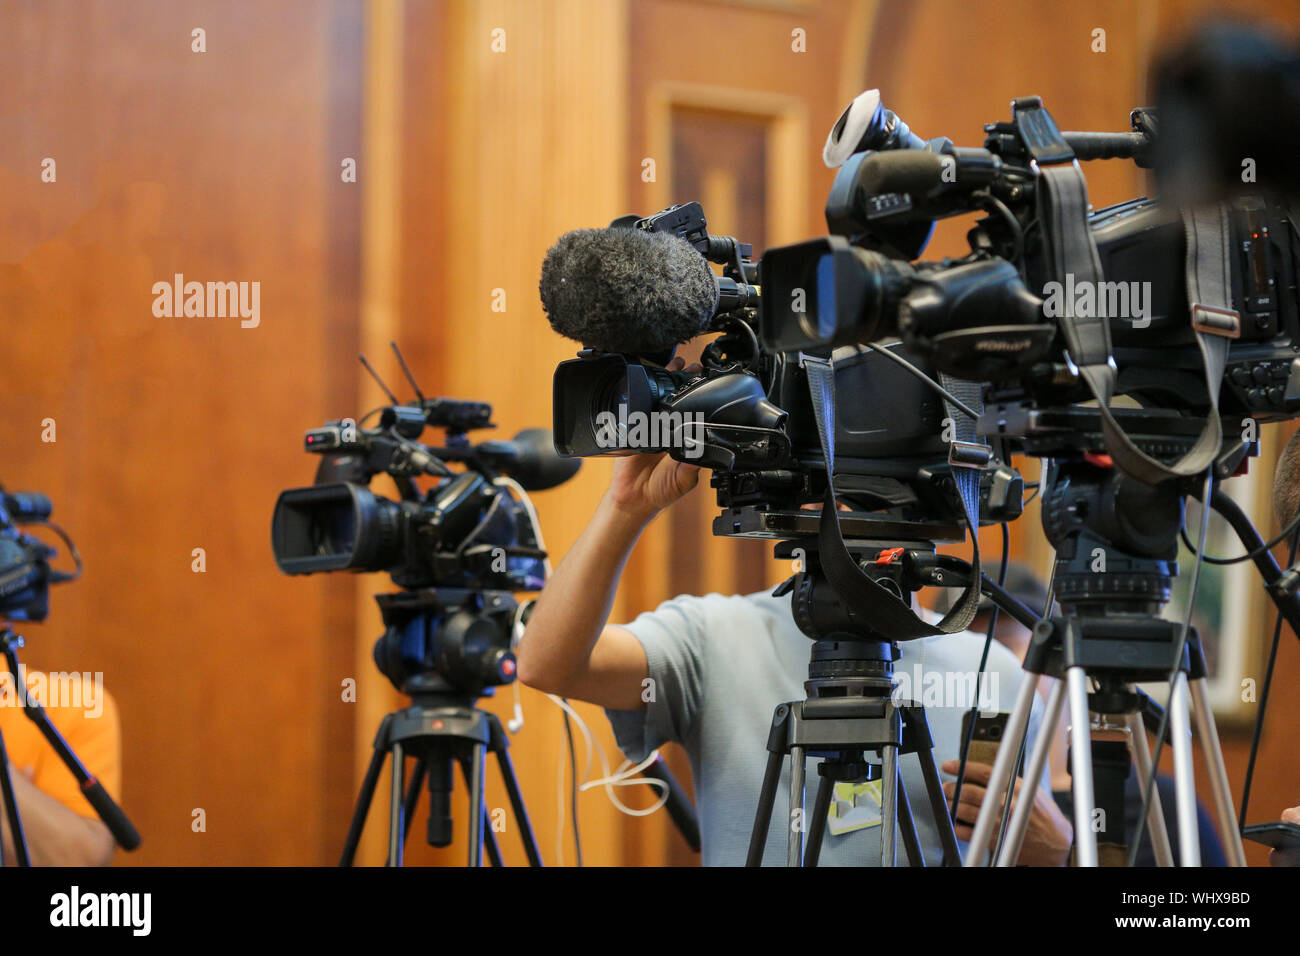 Details with television video cameras and recording equipment during a press event Stock Photo